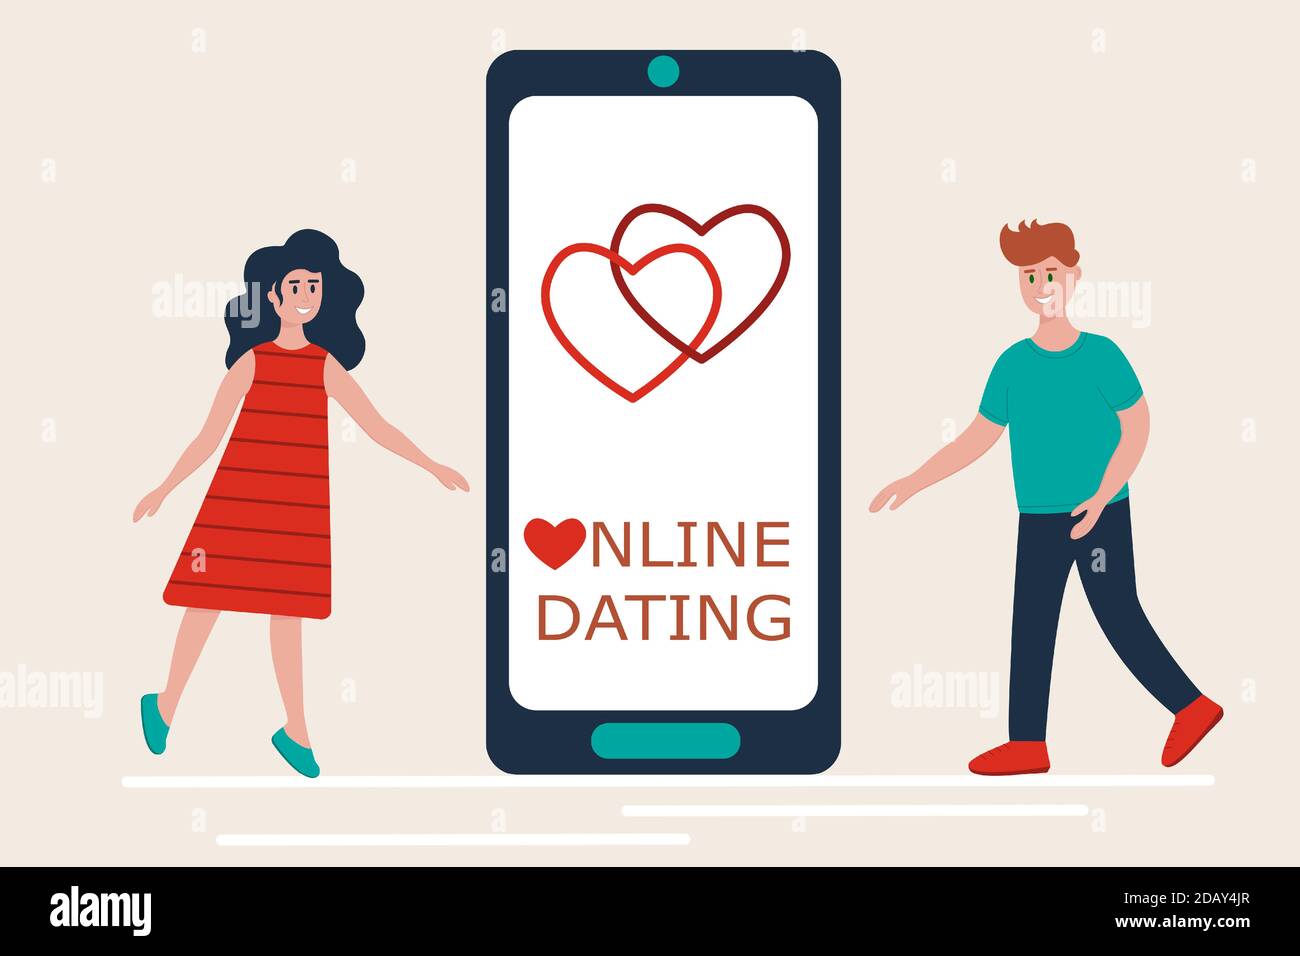 Online dating, long distance relationships, virtual love concept. Couple meeting near smartphone using mobile app for dating. Vector illustration in flat style, Stock Vector